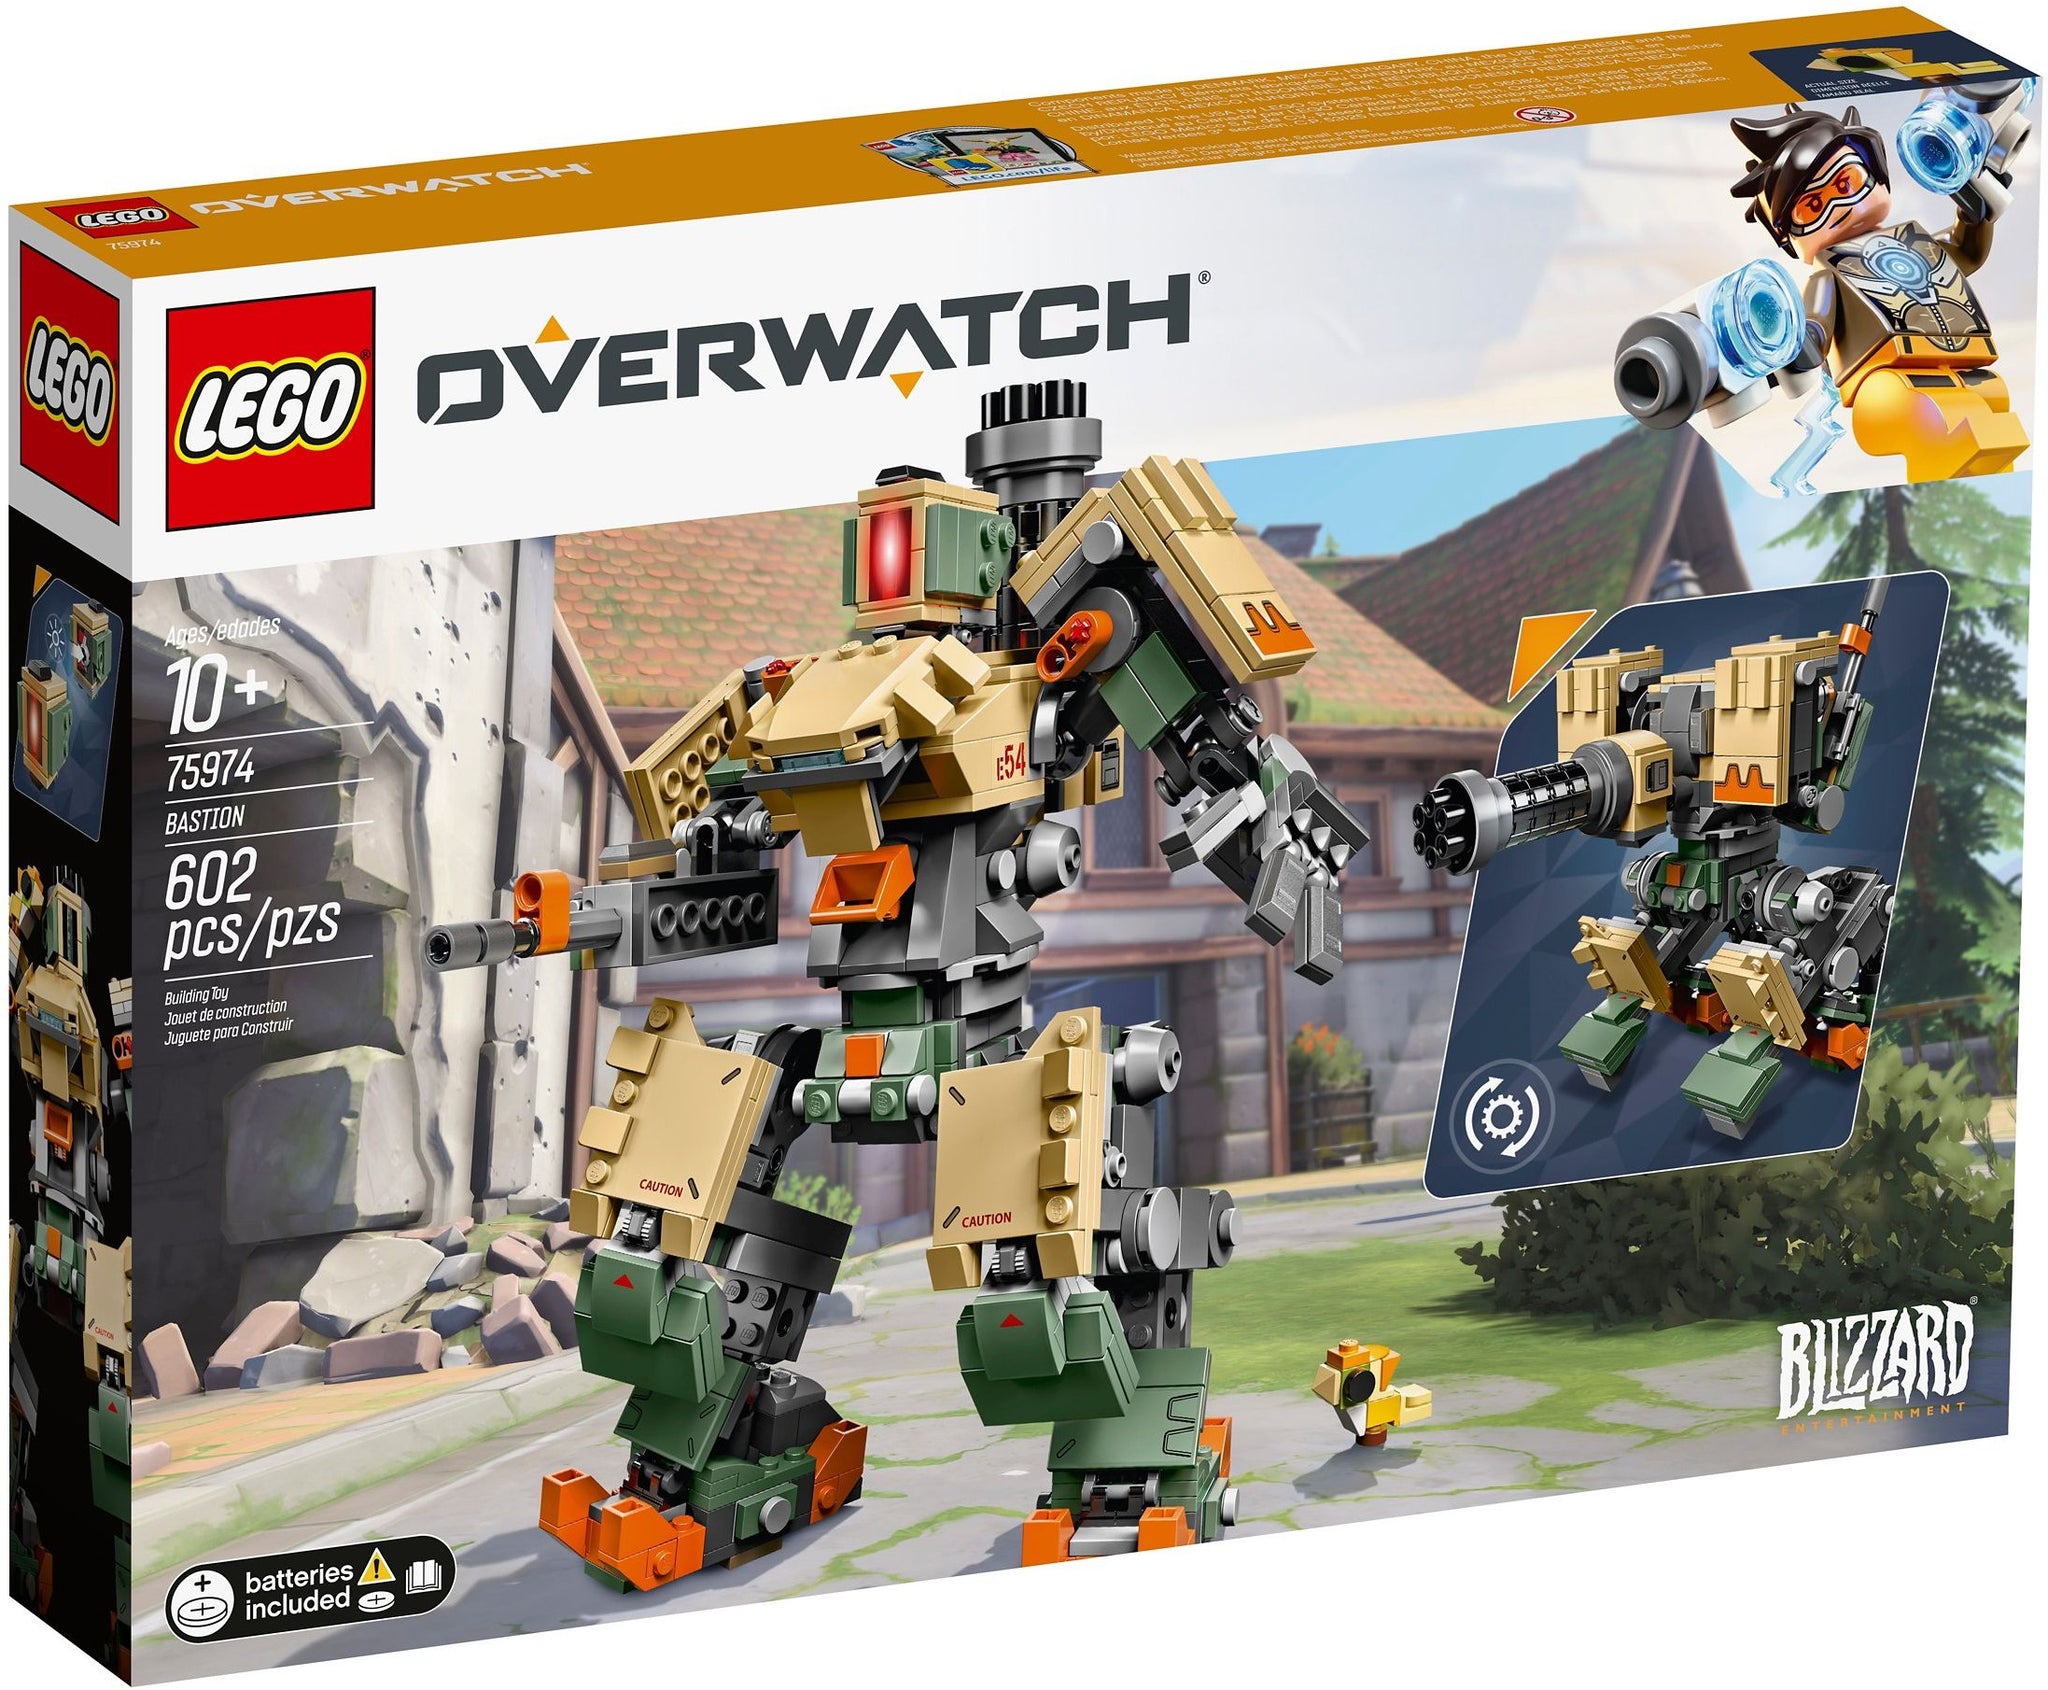 LEGO® Overwatch® Bastion (602 pieces) – AESOP'S FABLE